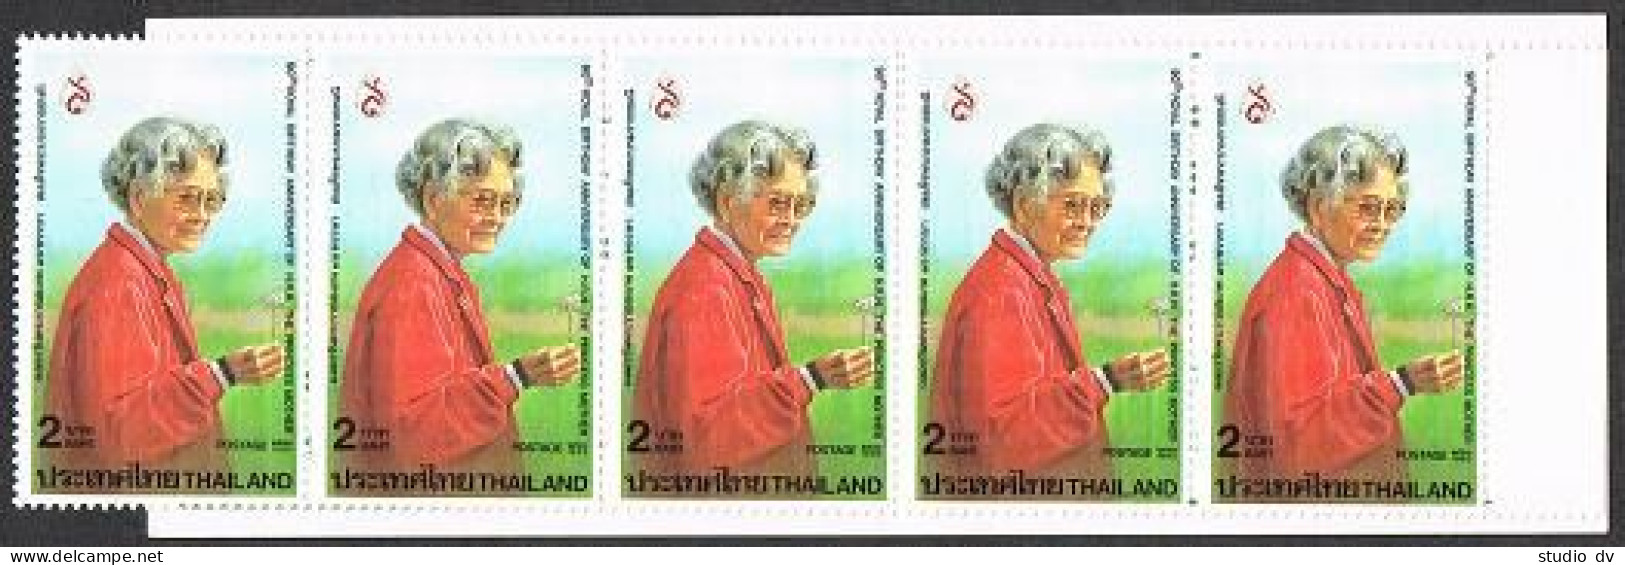 Thailand 1362 Booklet, MNH. Michel 1379 MH. Princess Mother-90, 1990. - Thailand